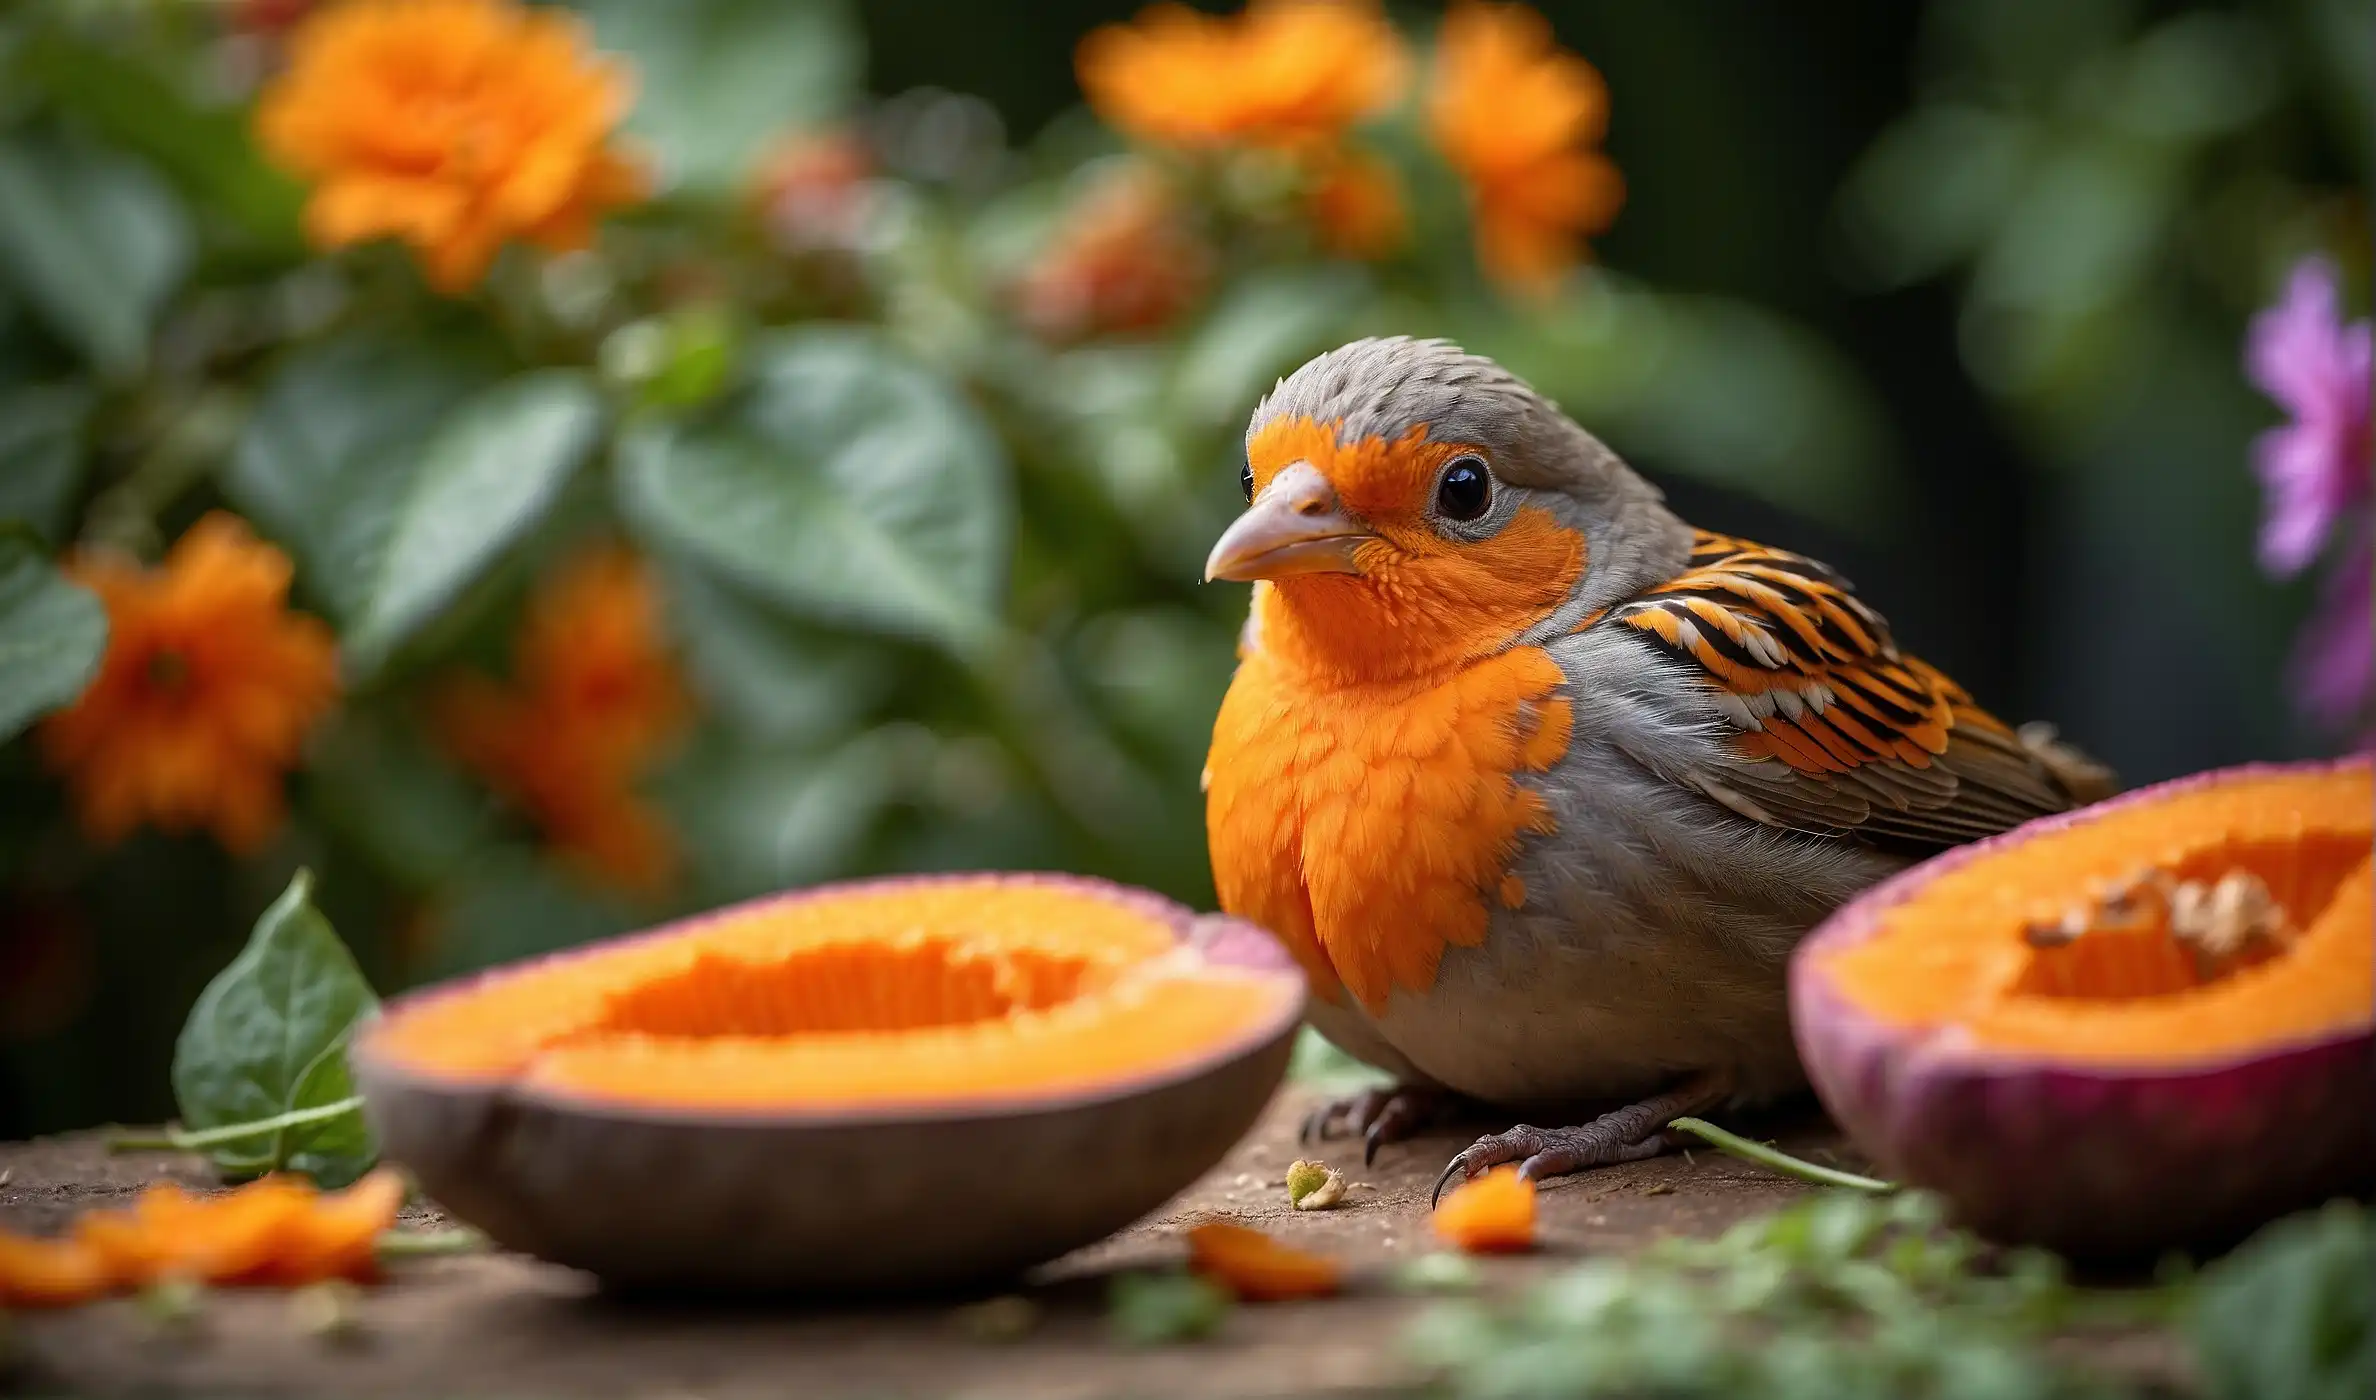 Can Birds Eat Sweet Potato? Nutritional Facts Revealed